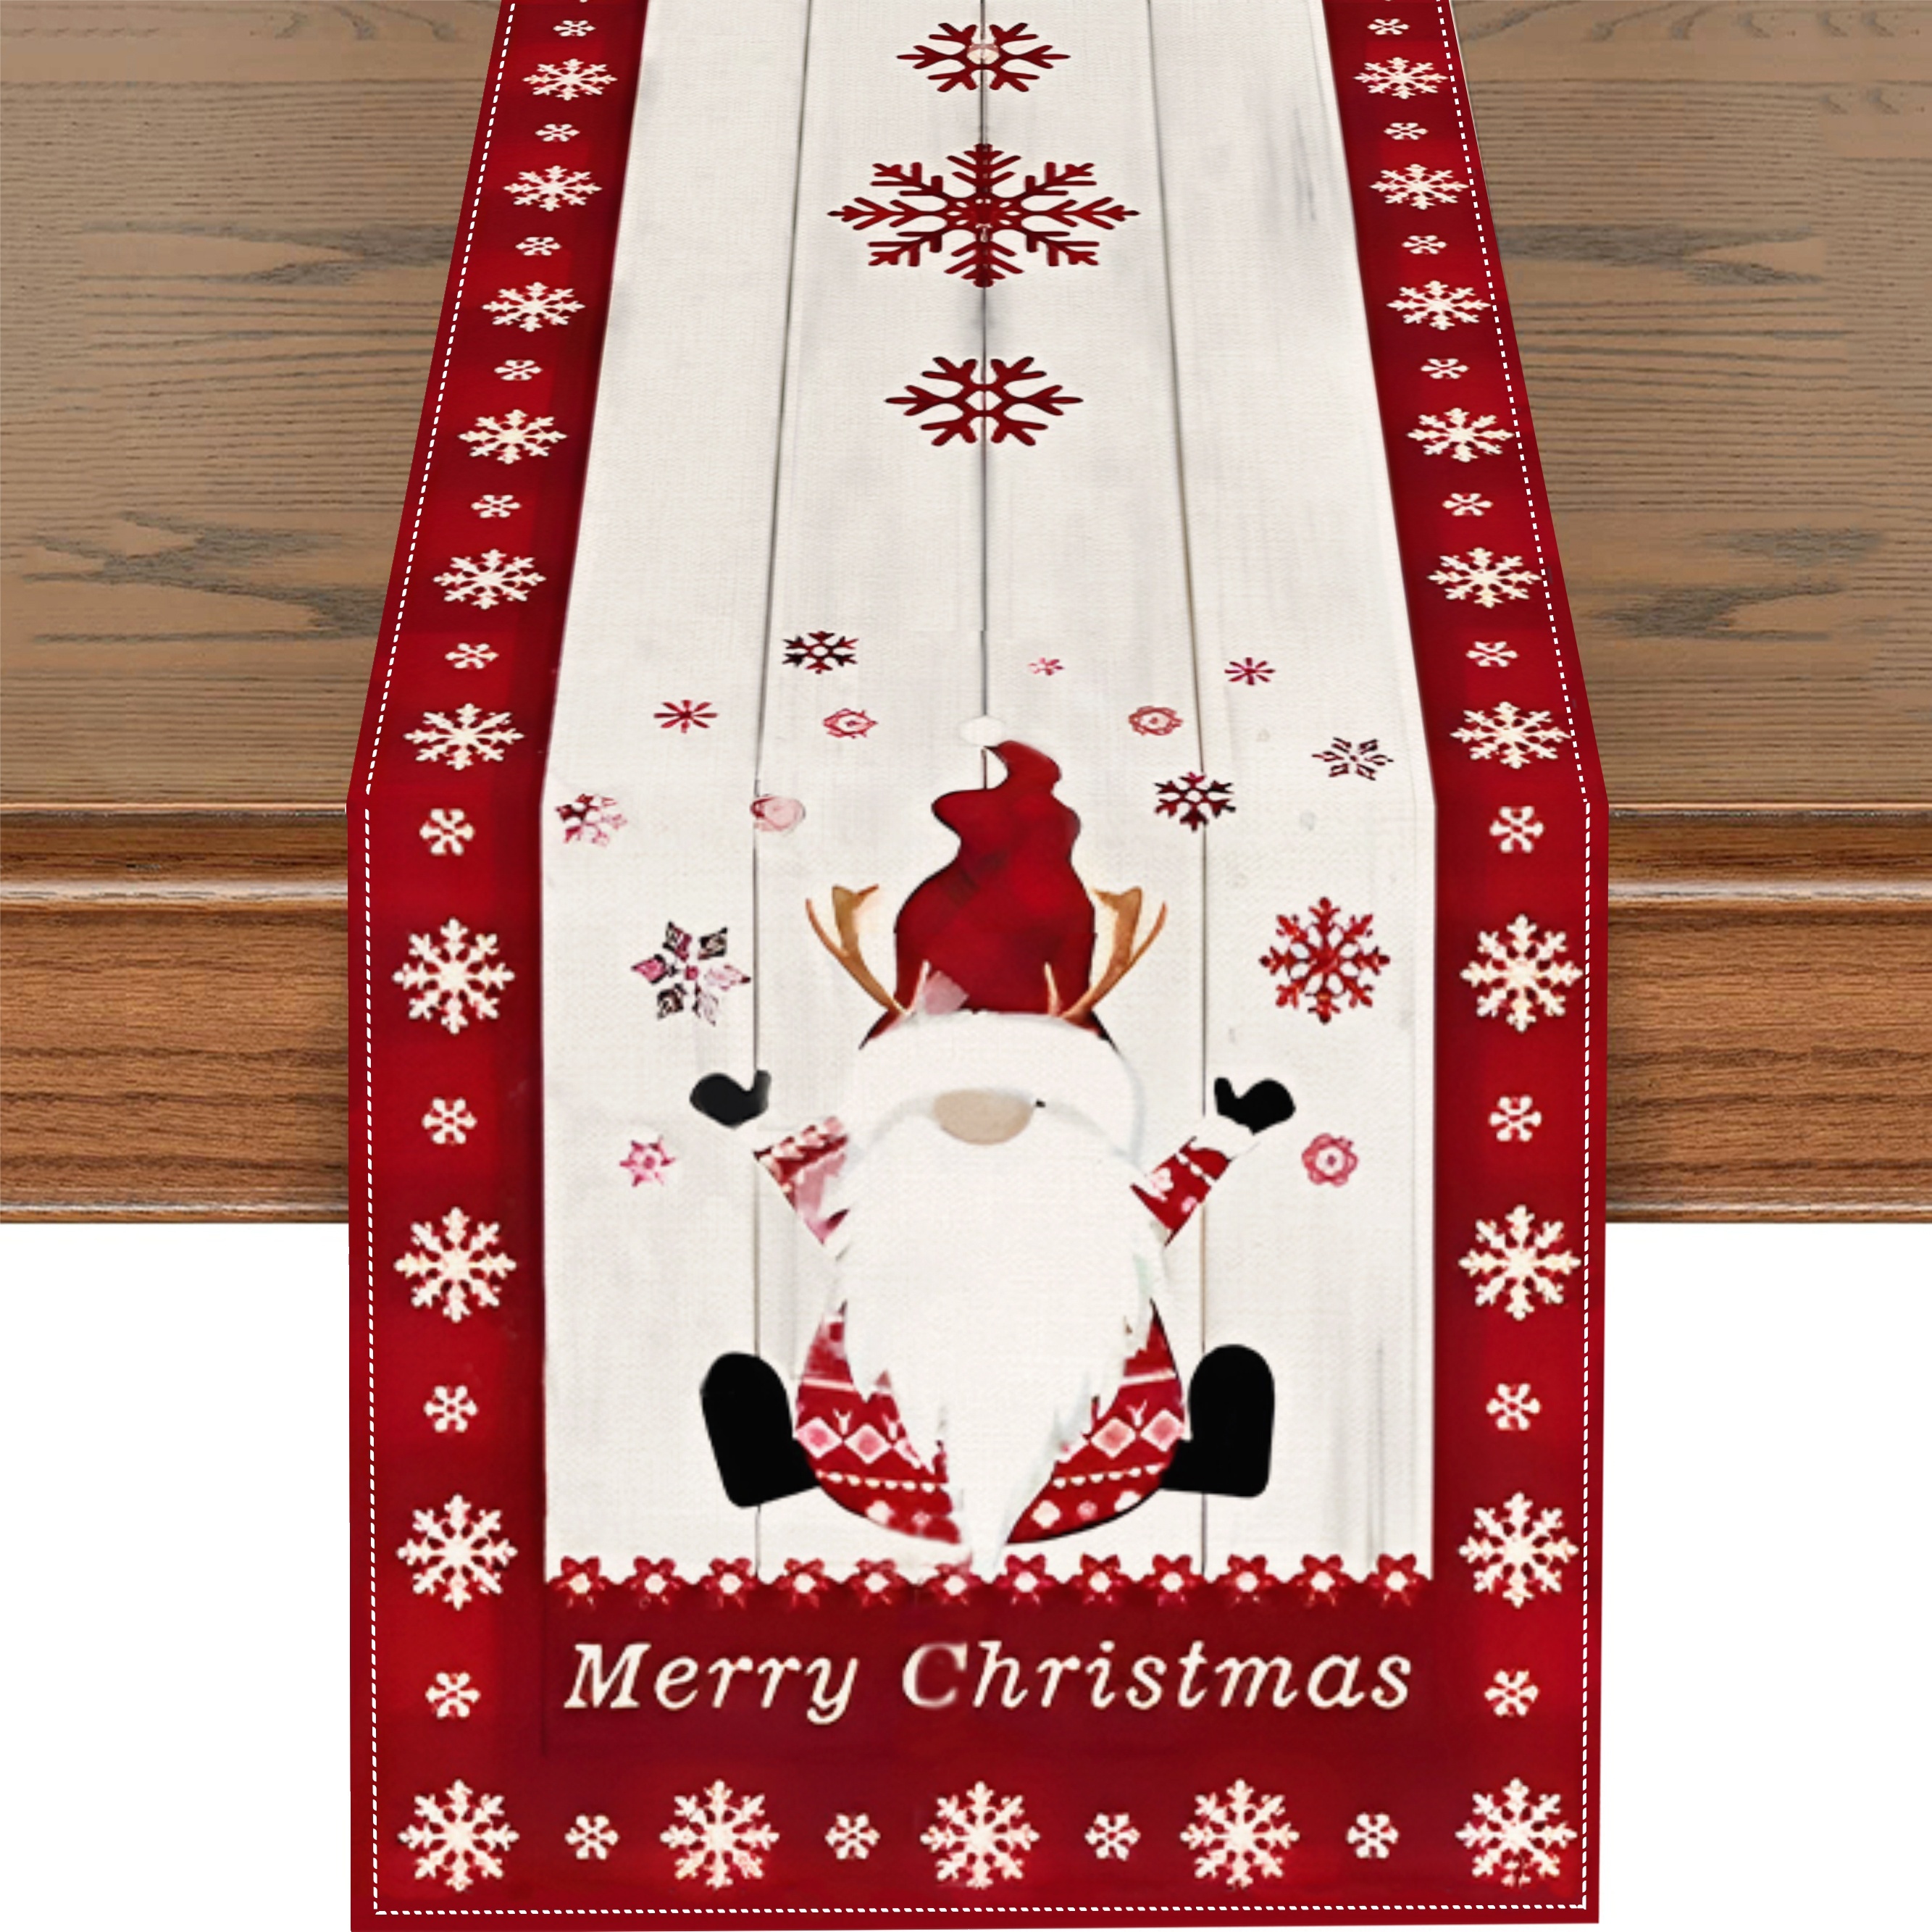 

1pc, Linen Table Runner, Christmas Theme Table Runner, Gnome Snowflake Pattern Table Runner, Seasonal Winter Xmas Holiday Kitchen Dining Table Decoration, For Indoor Outdoor Home Party Decor